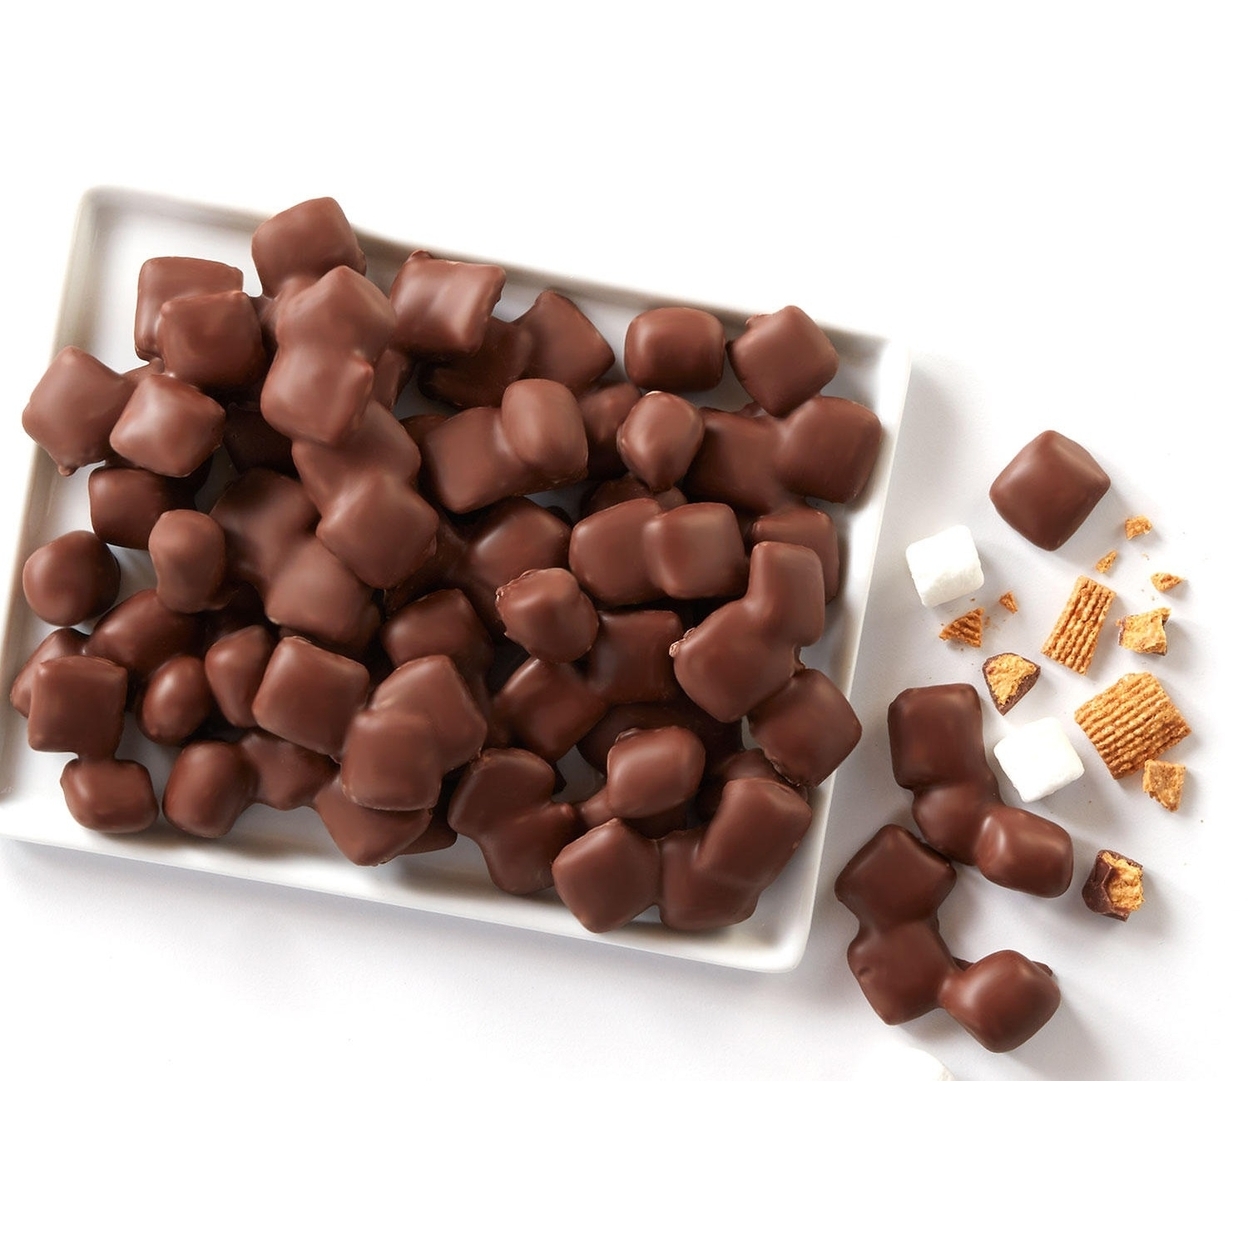 Fannie May S'mores Snack Mix Bag (14 Ounce)